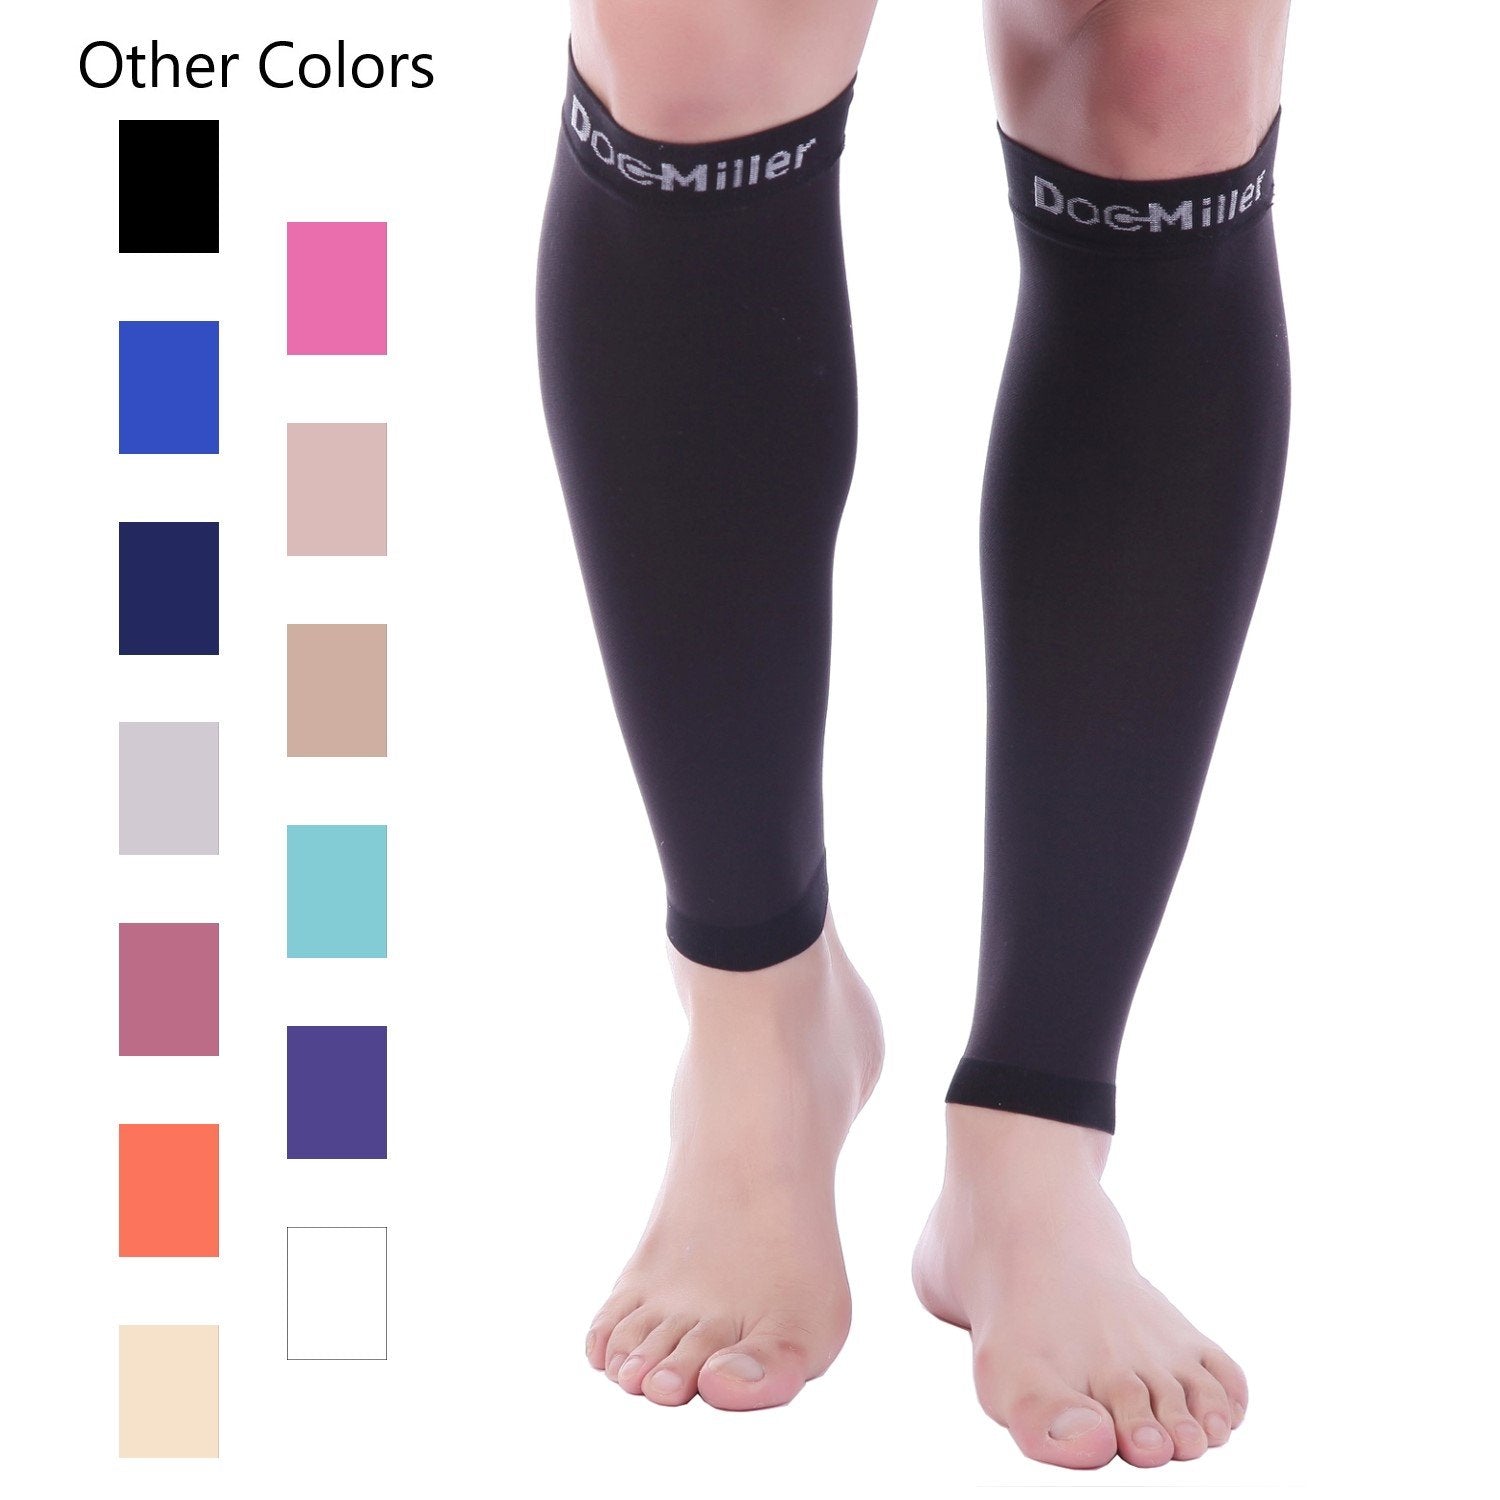 Plus Size Compression Socks for Women Men 20-30 mmHg 2xl 3xl 4xl , Wide  Calf High Tights Long SocksStockings Best Support for Circulation, Running  